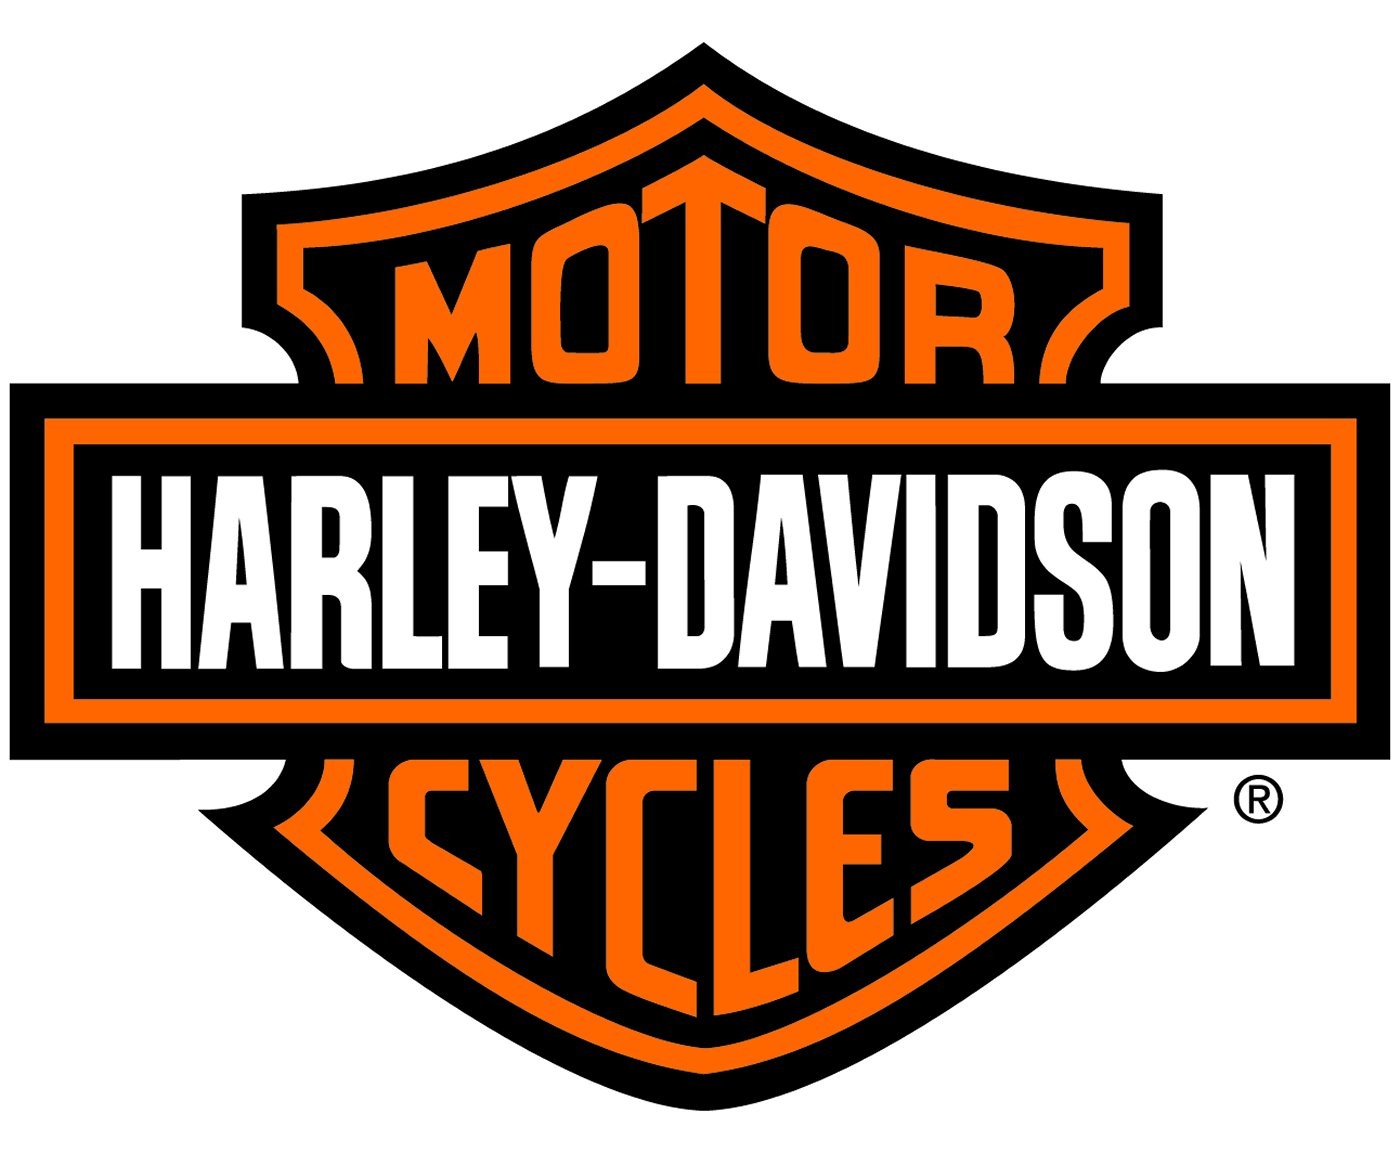 General 1400x1153 Harley-Davidson logo white background motorcycle brand company simple background